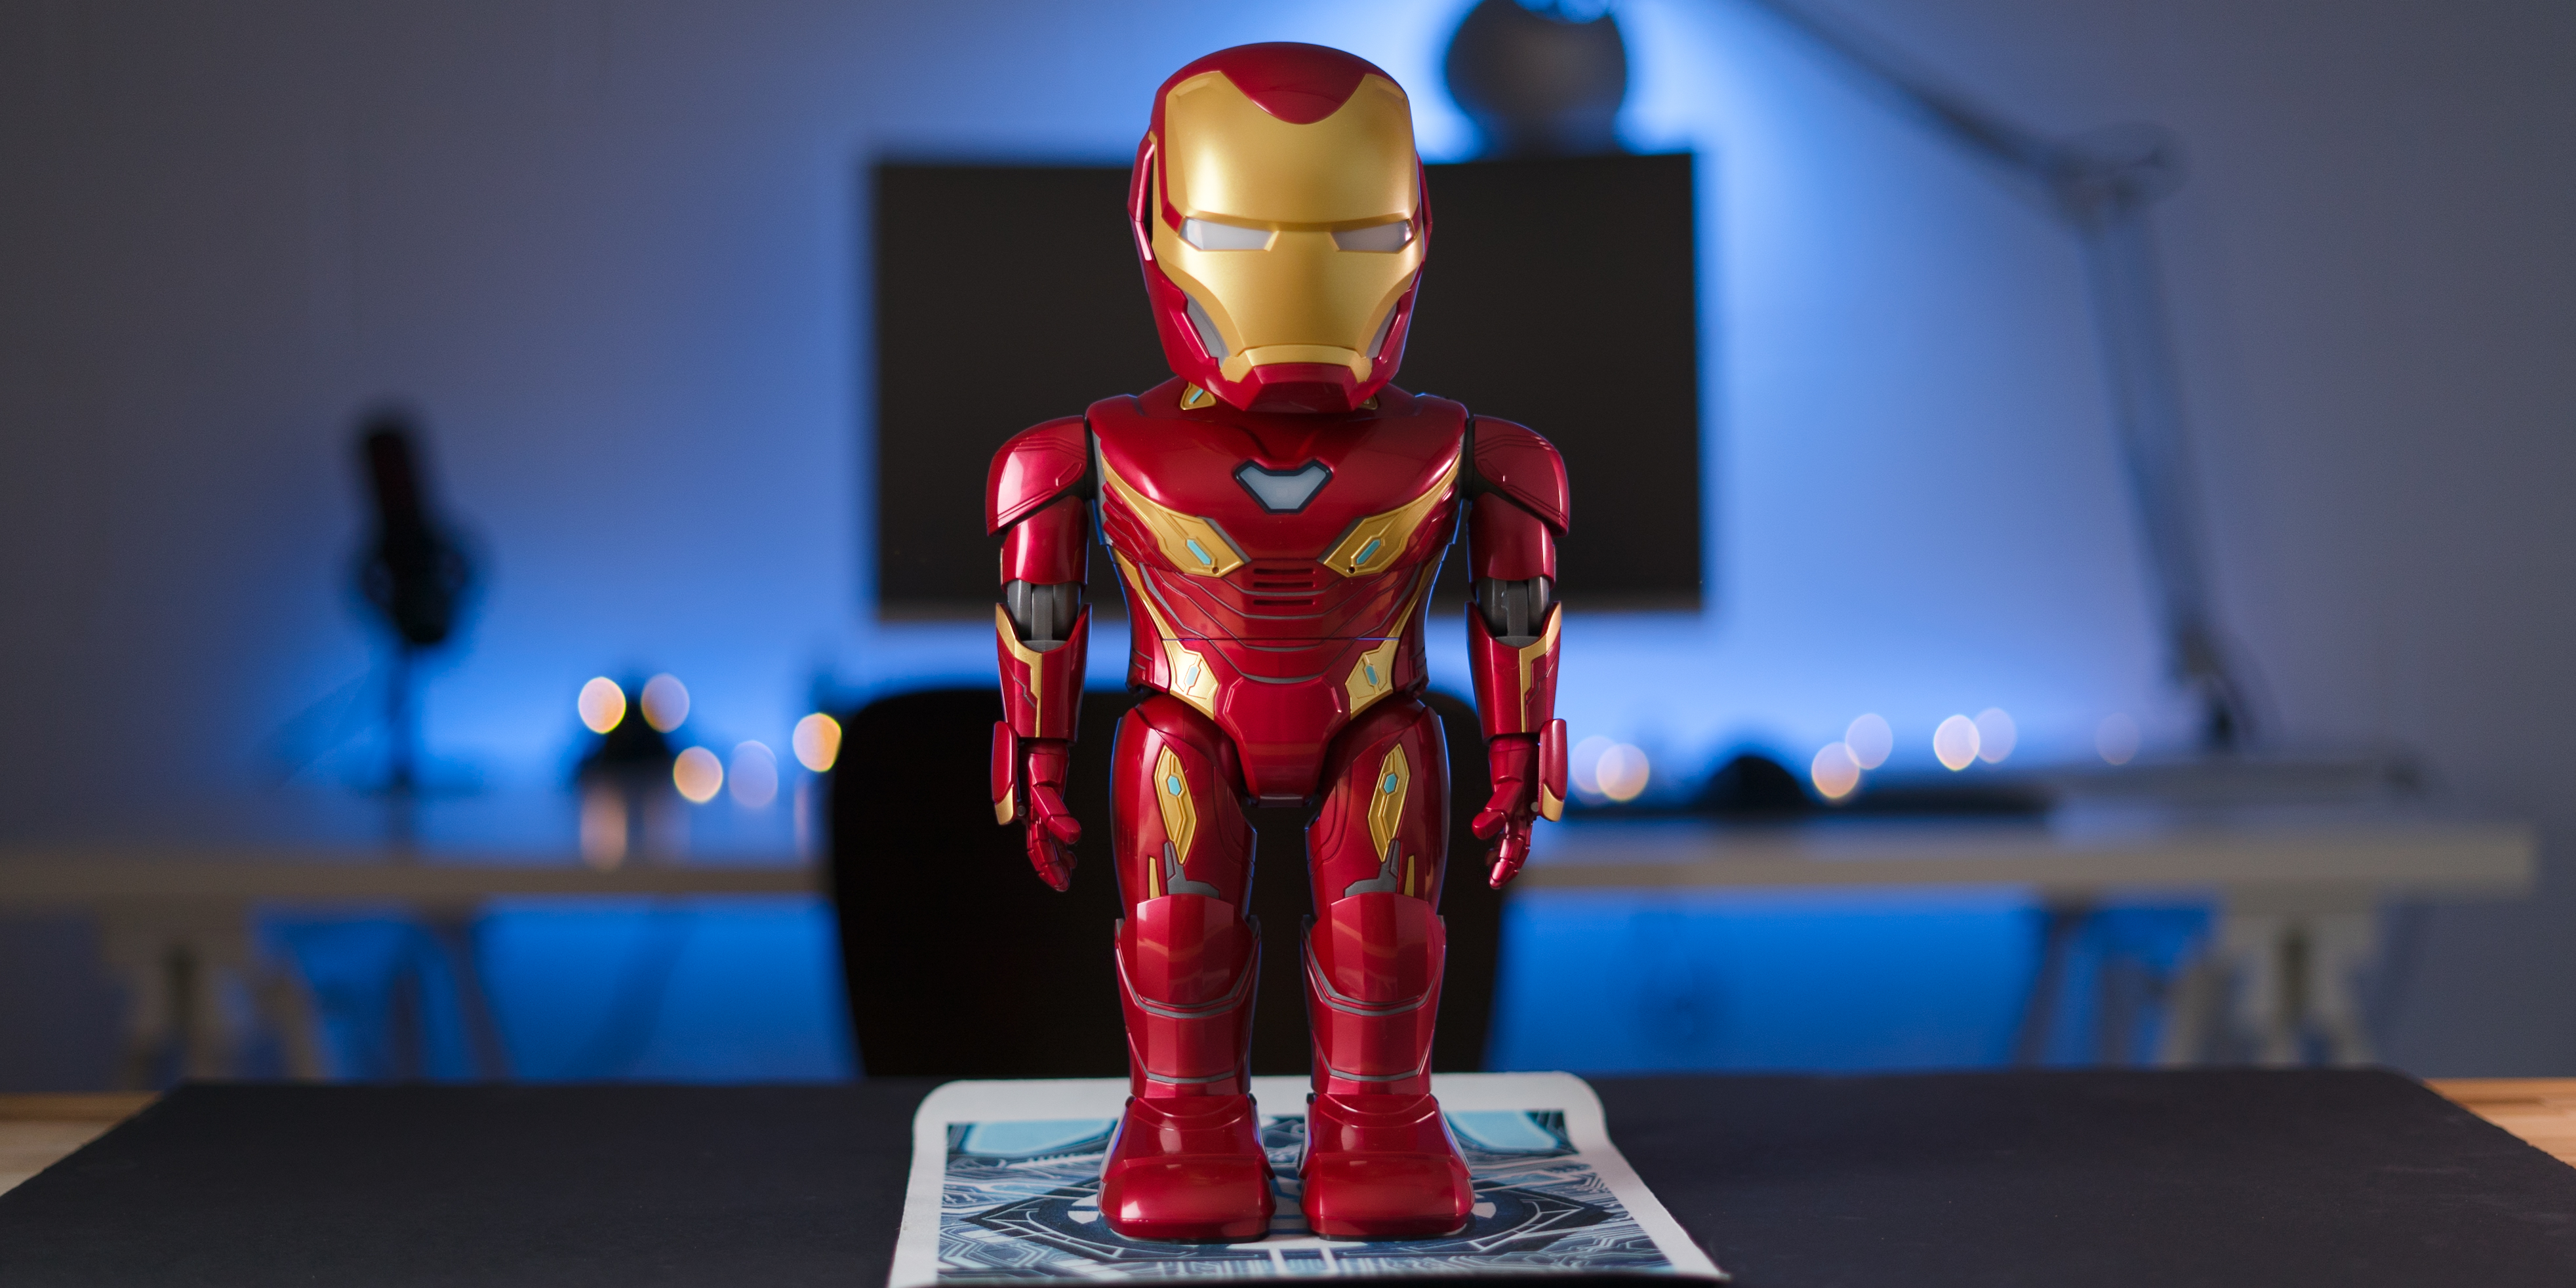 Bring home UBTECH's iPhone enabled Iron Man Robot at $20 Save ...